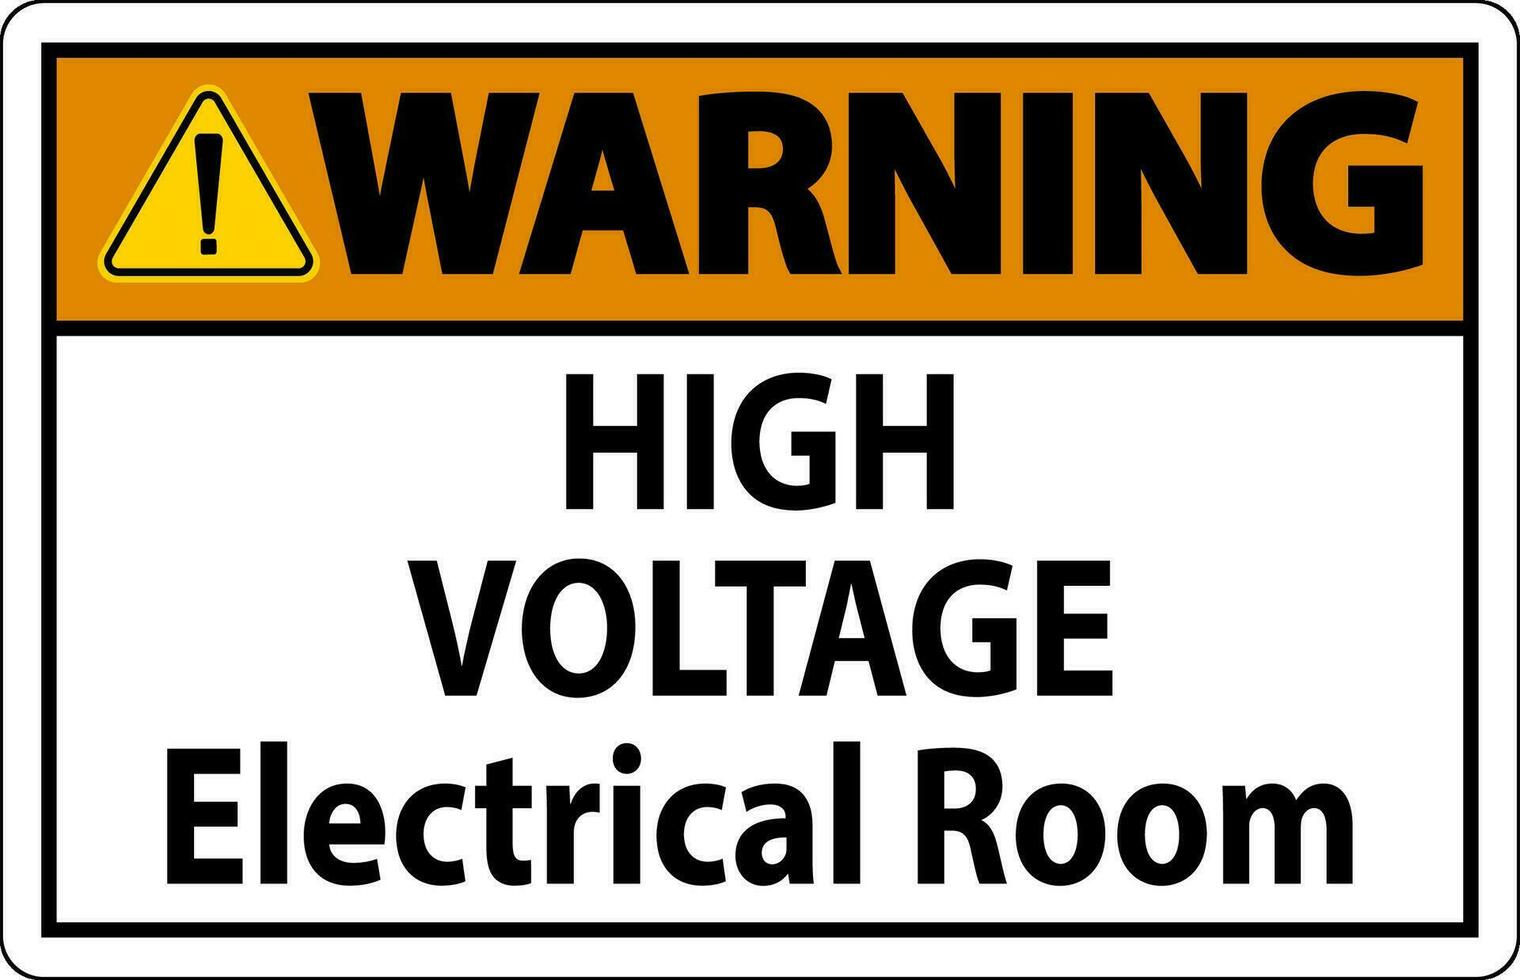 Warning Sign High Voltage - Electrical Room vector